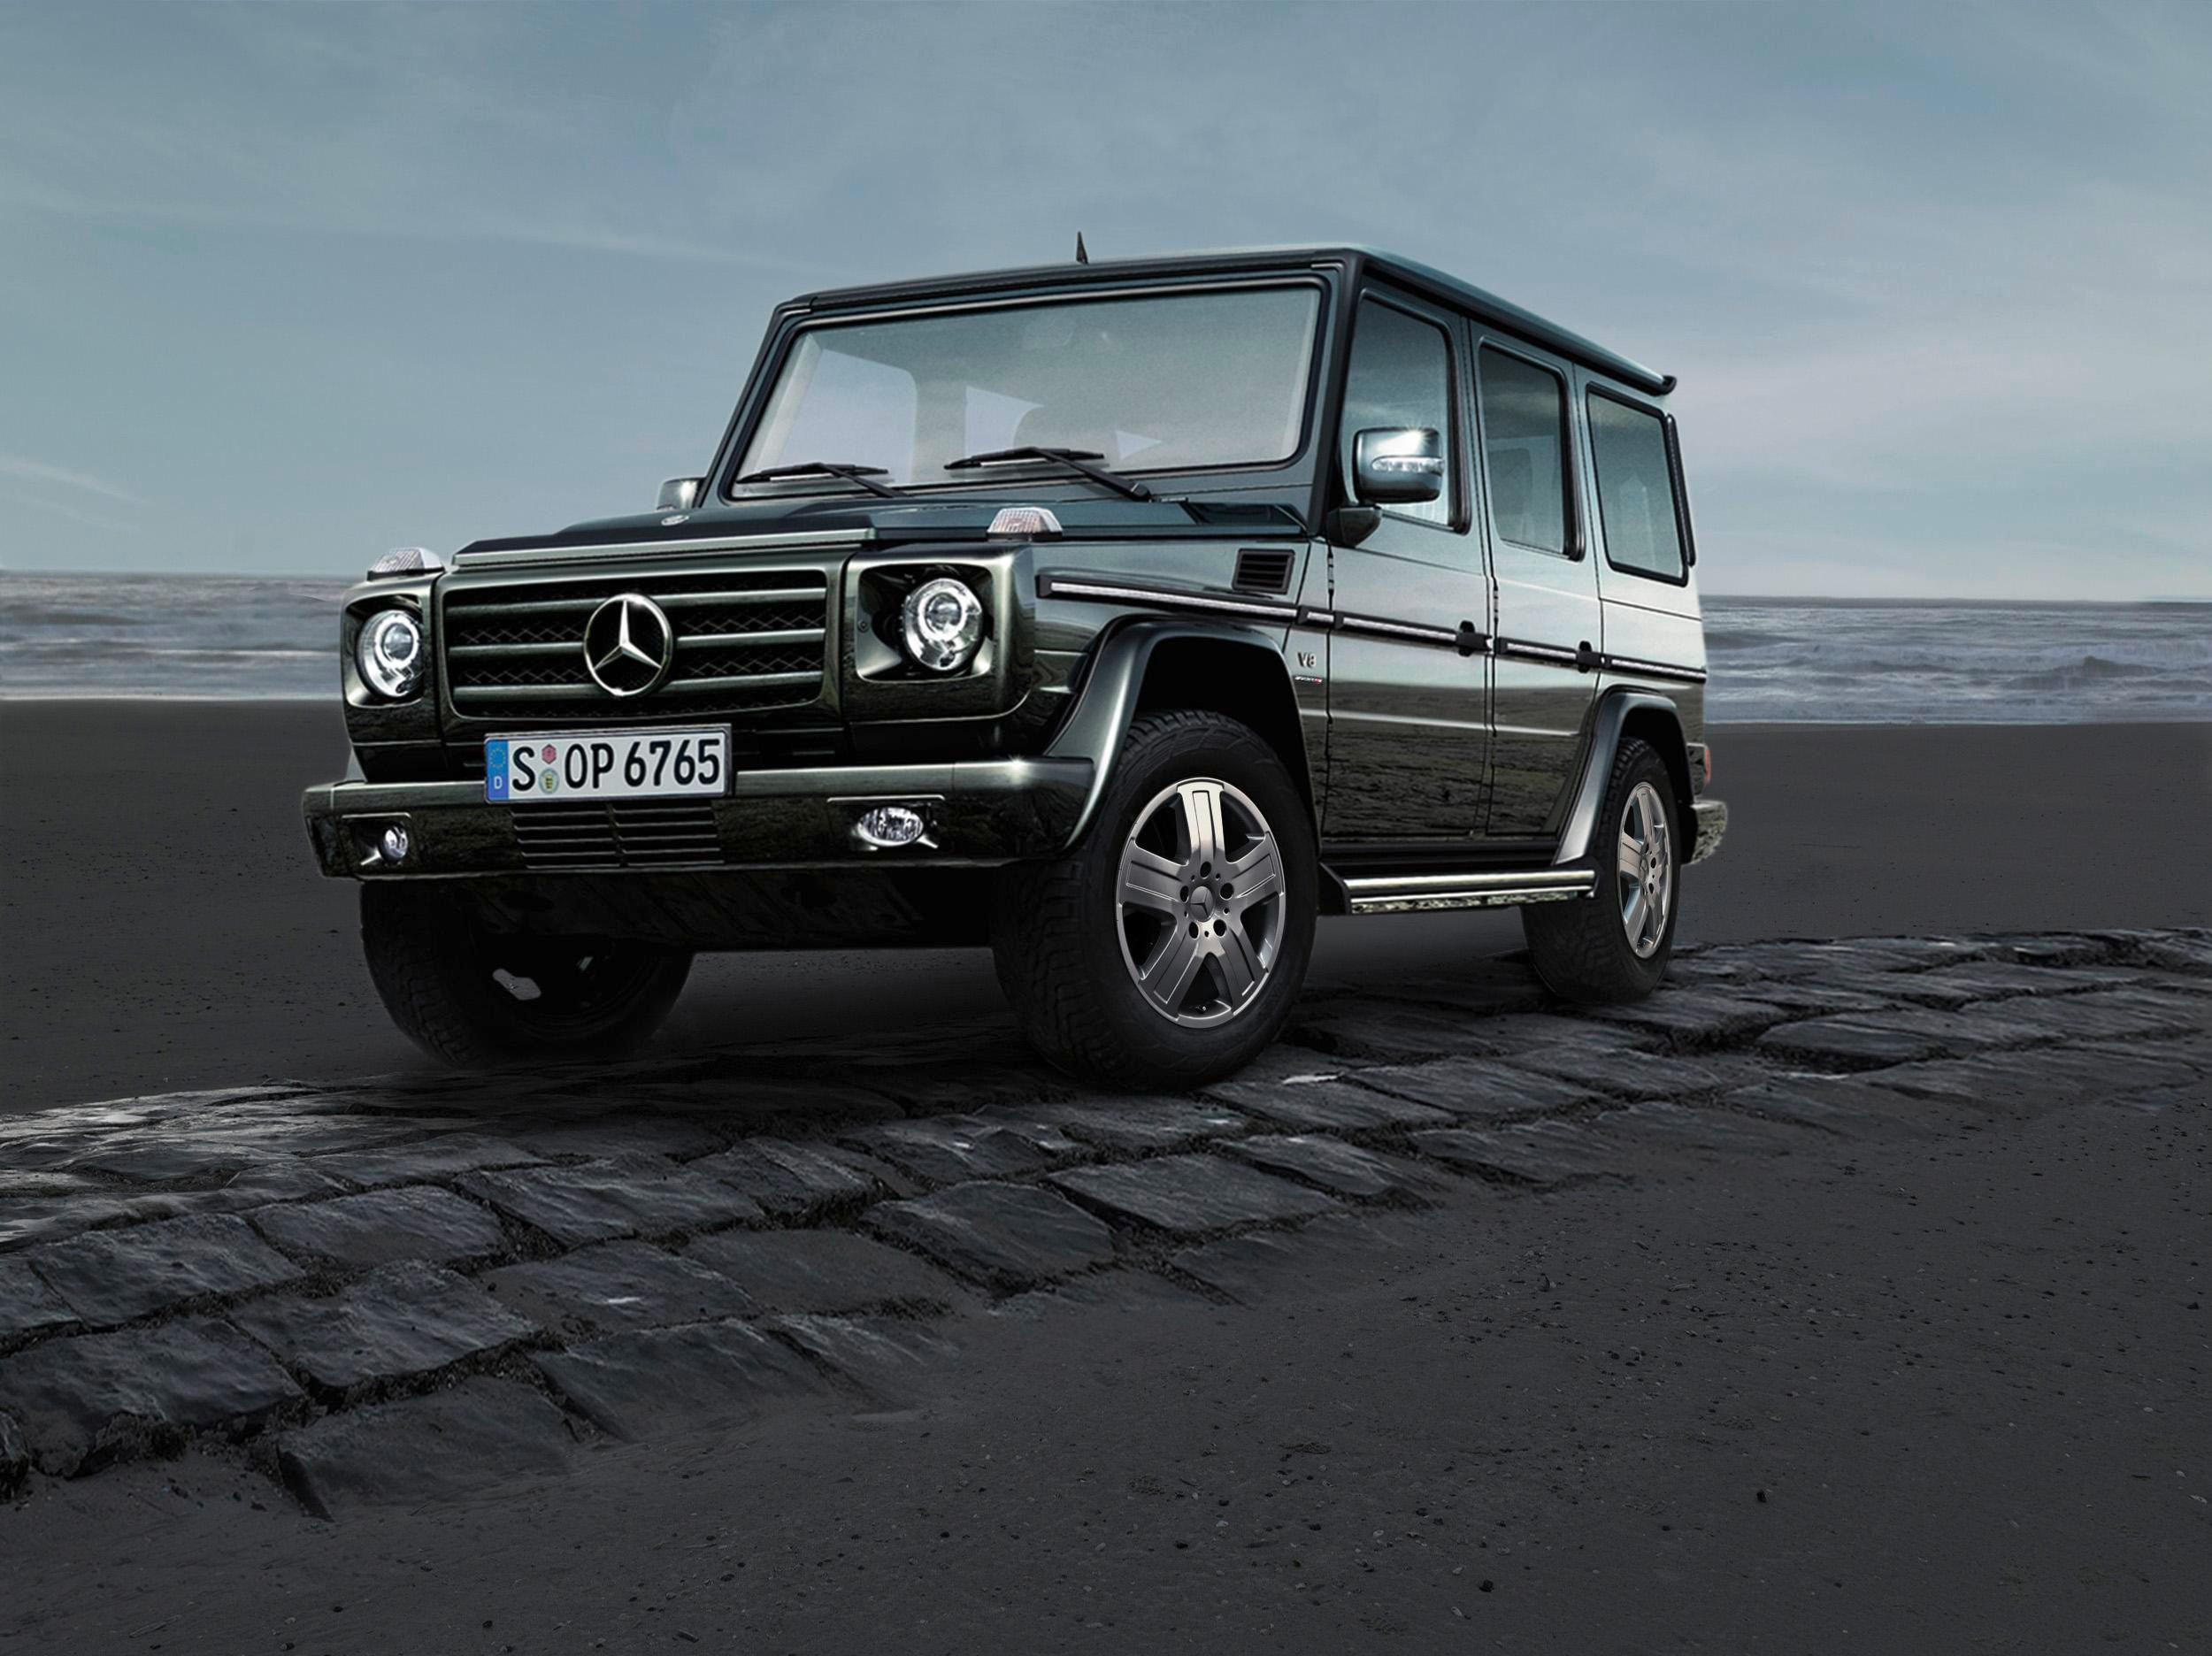 2009 Mercedes G-Class EDITION30 and G-Class EDITION30.PUR